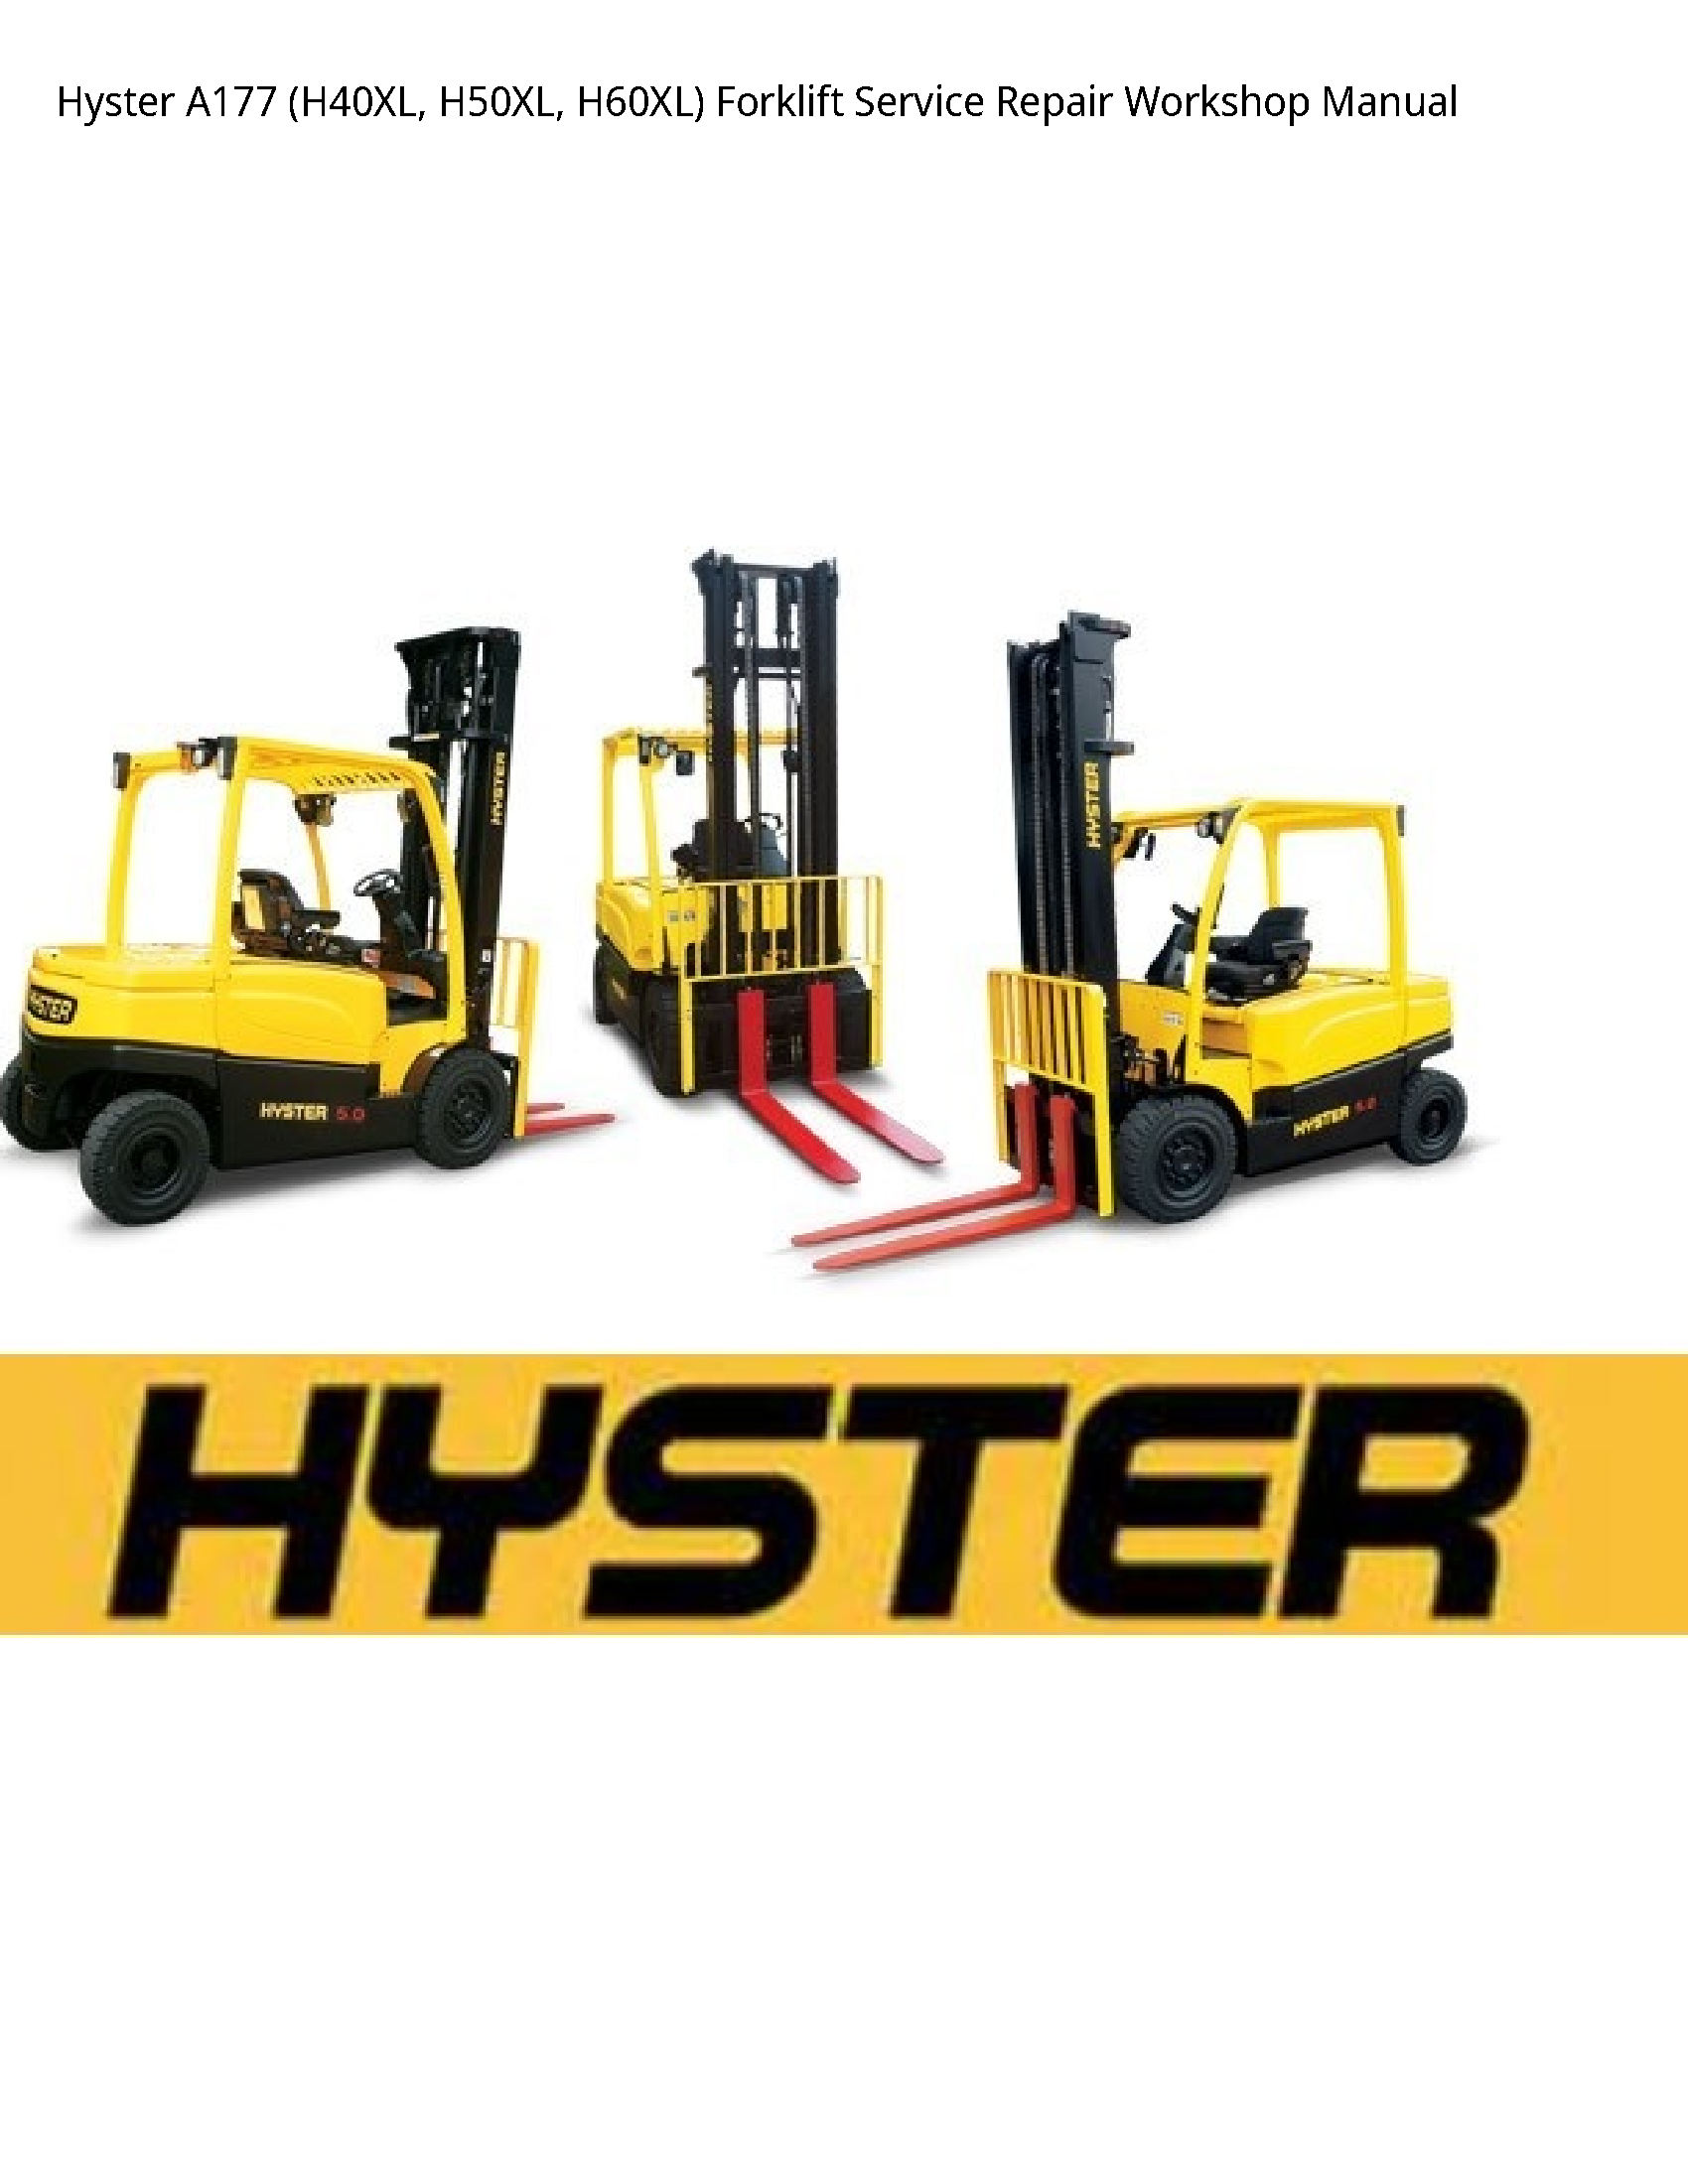 Hyster A177 Forklift manual